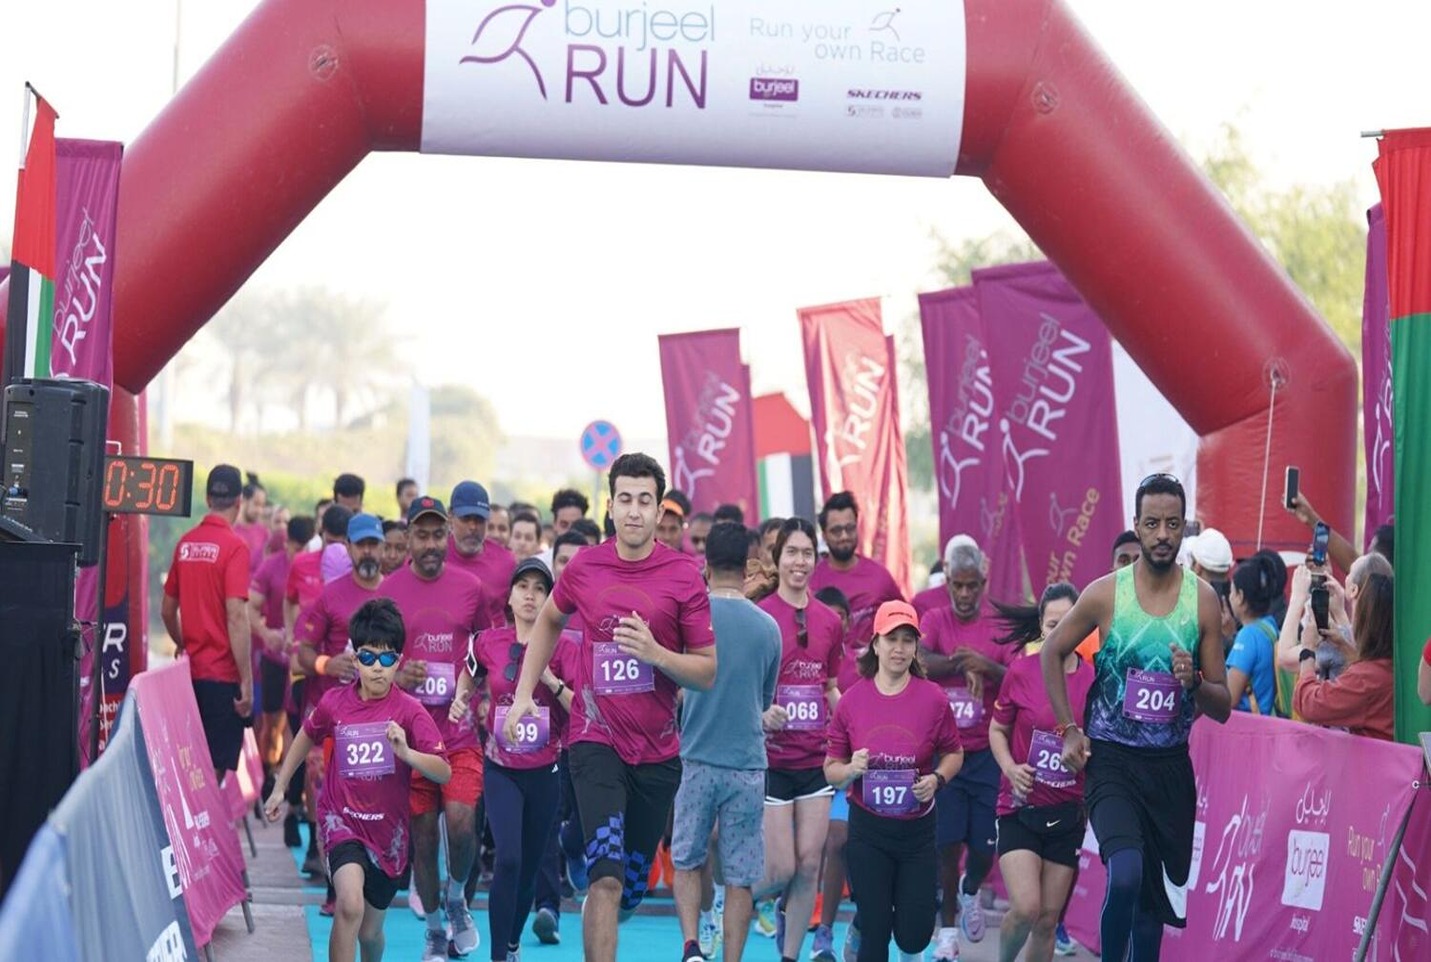 Dubai rallies for health and fun at the Burjeel Run Challenge with impressive participation